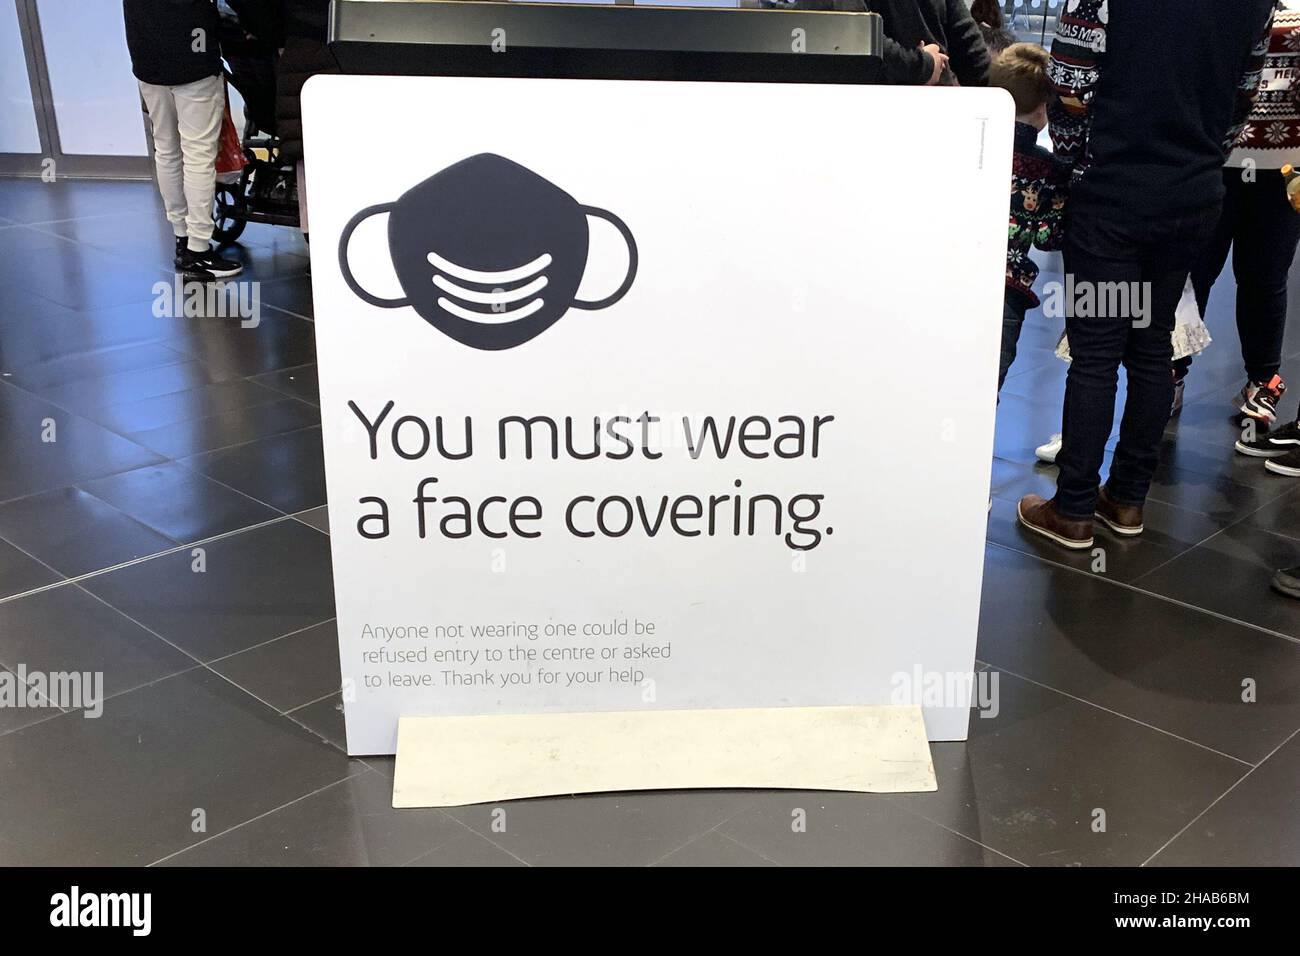 Lakeside Shopping Centre, Thurrock, UK. 12th December 2021. Mask-less Christmas shoppers pack into the Lakeside Shopping Centre in Thurrock, Essex despite Government advice and the shopping centre rules of entry.  Credit: Headlinephoto/Alamy Live News Stock Photo